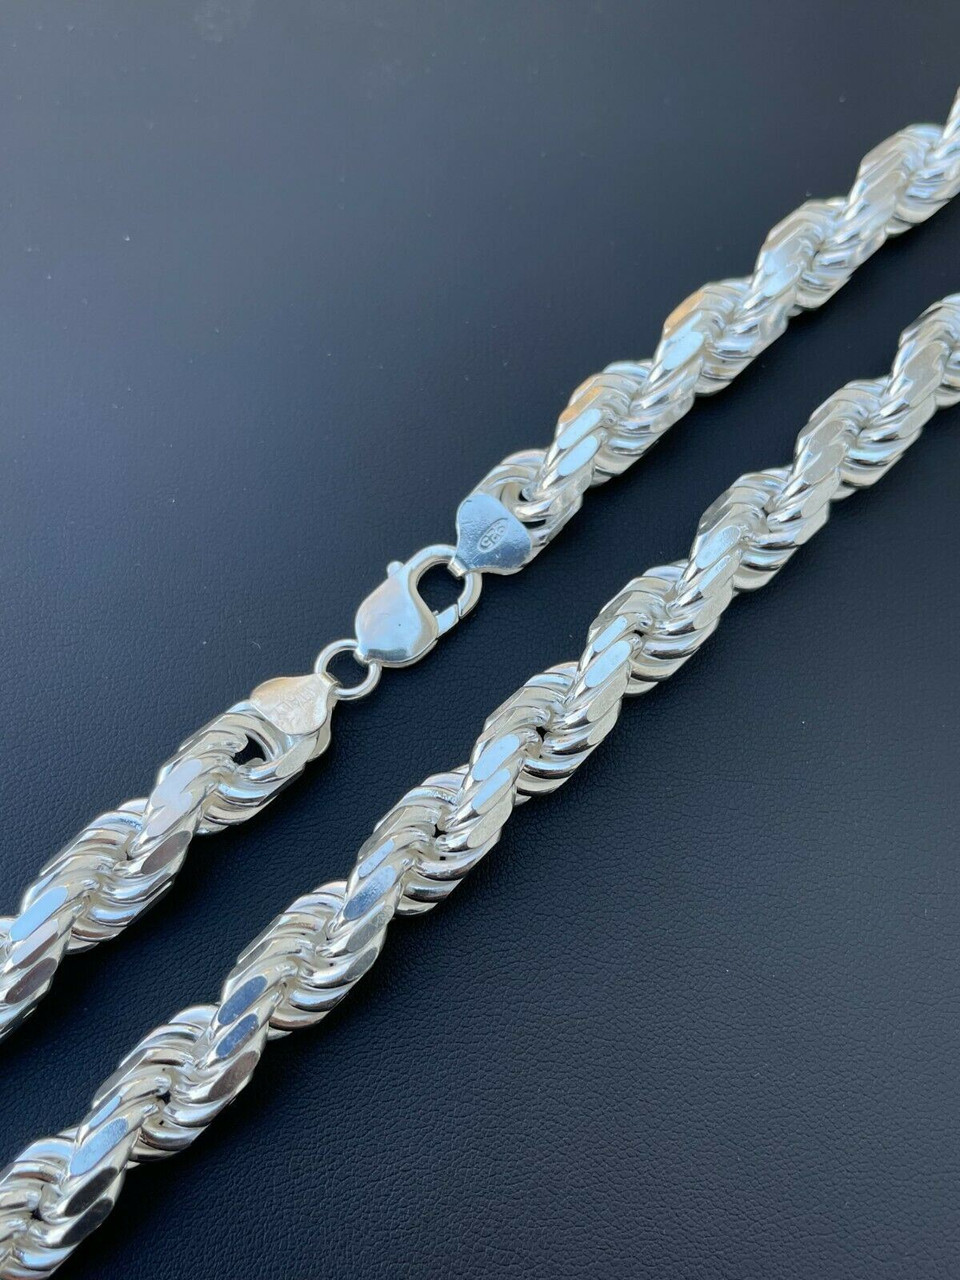 Real Solid 925 Sterling Silver 11mm Thick Men's Rope Chain